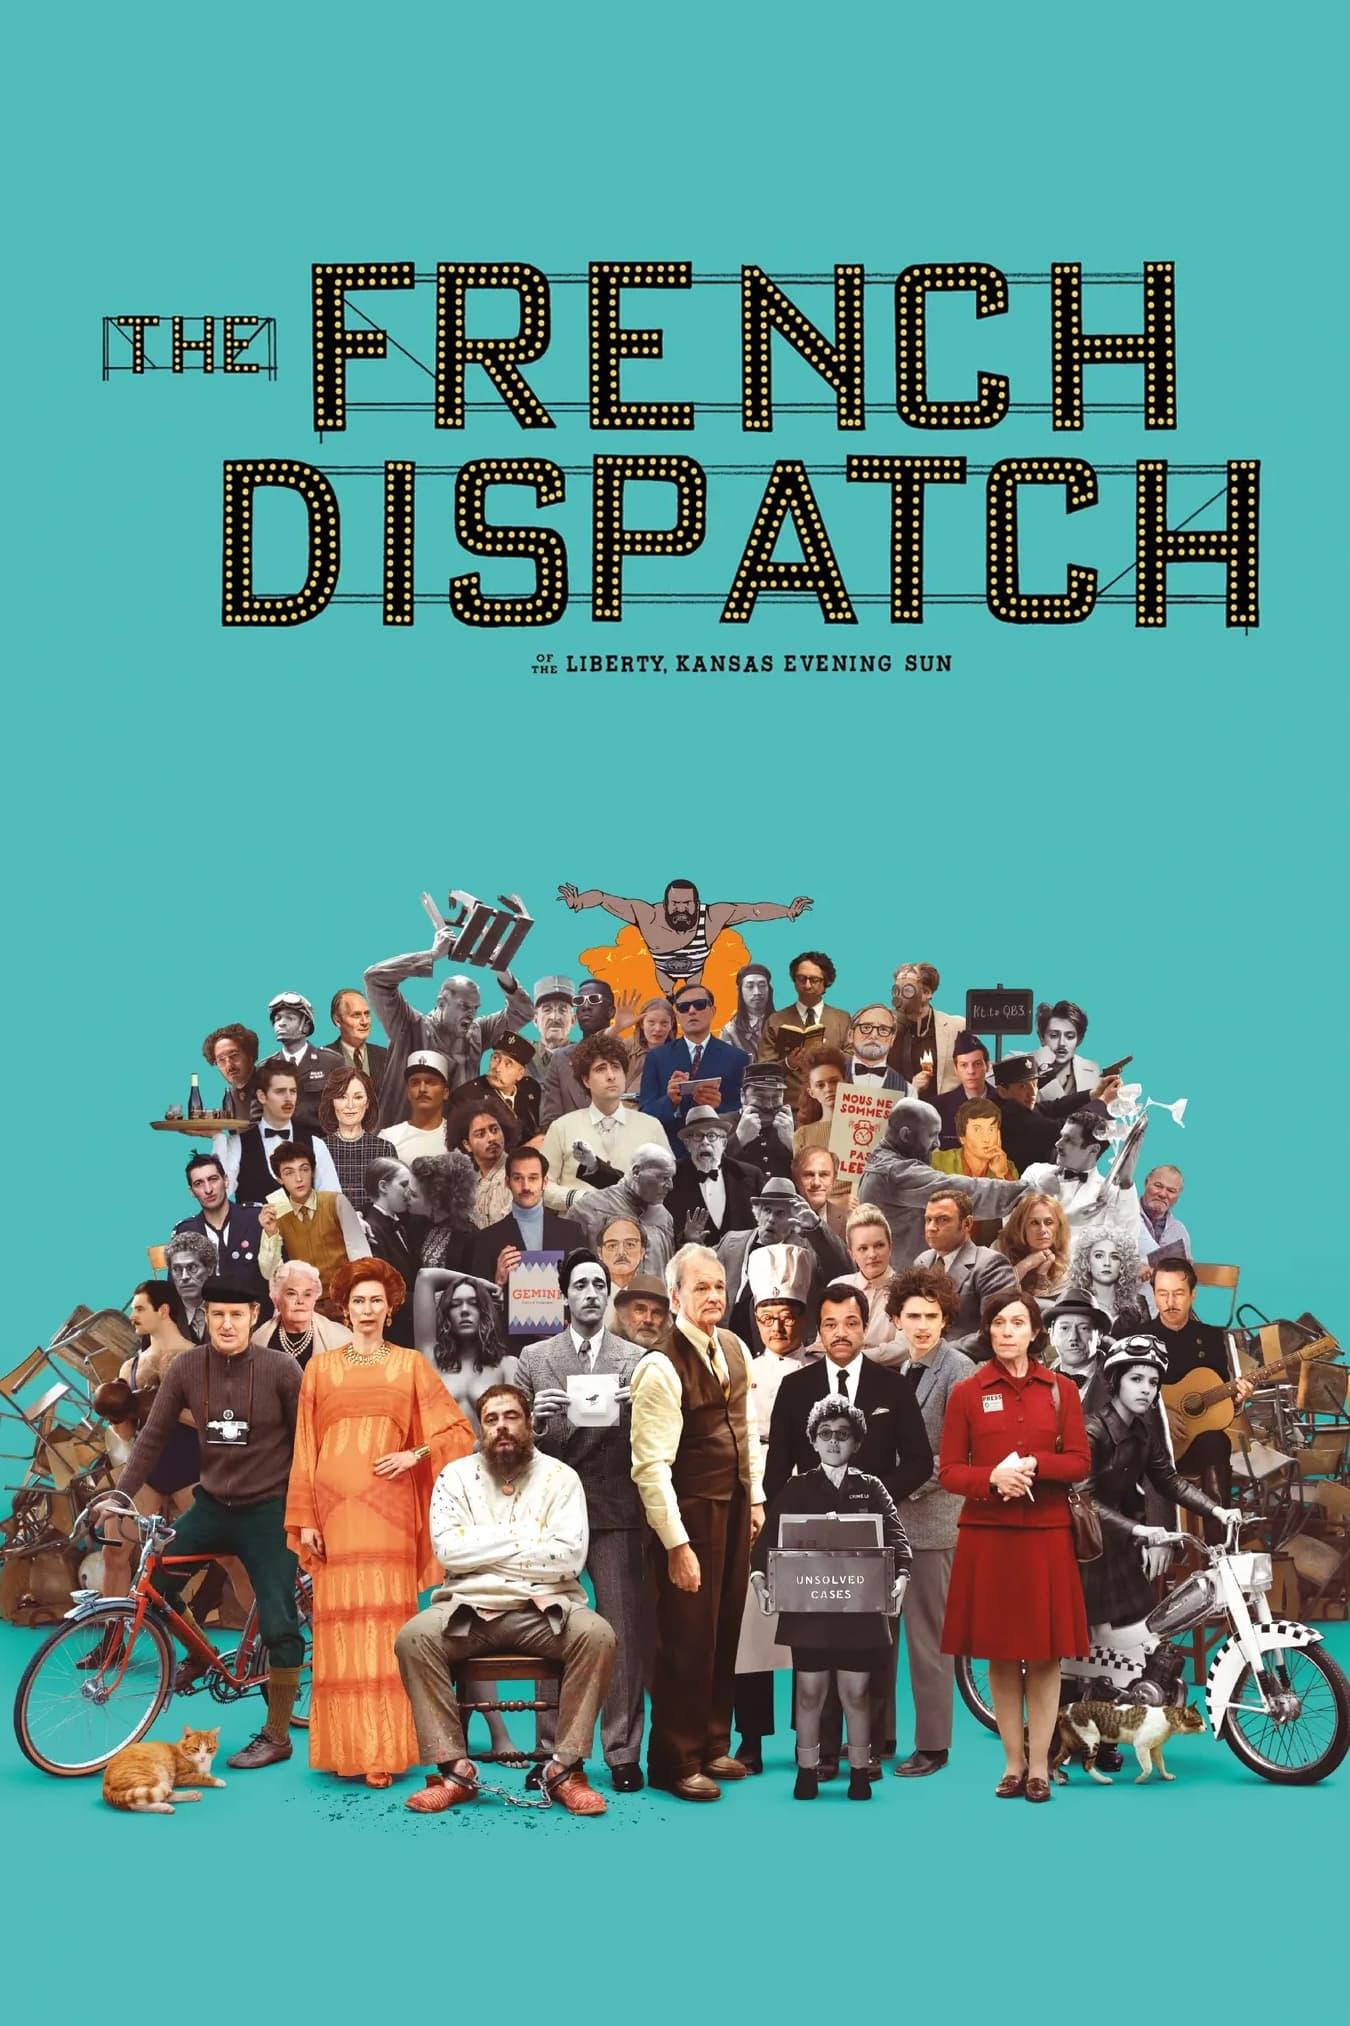 The French Dispatch poster